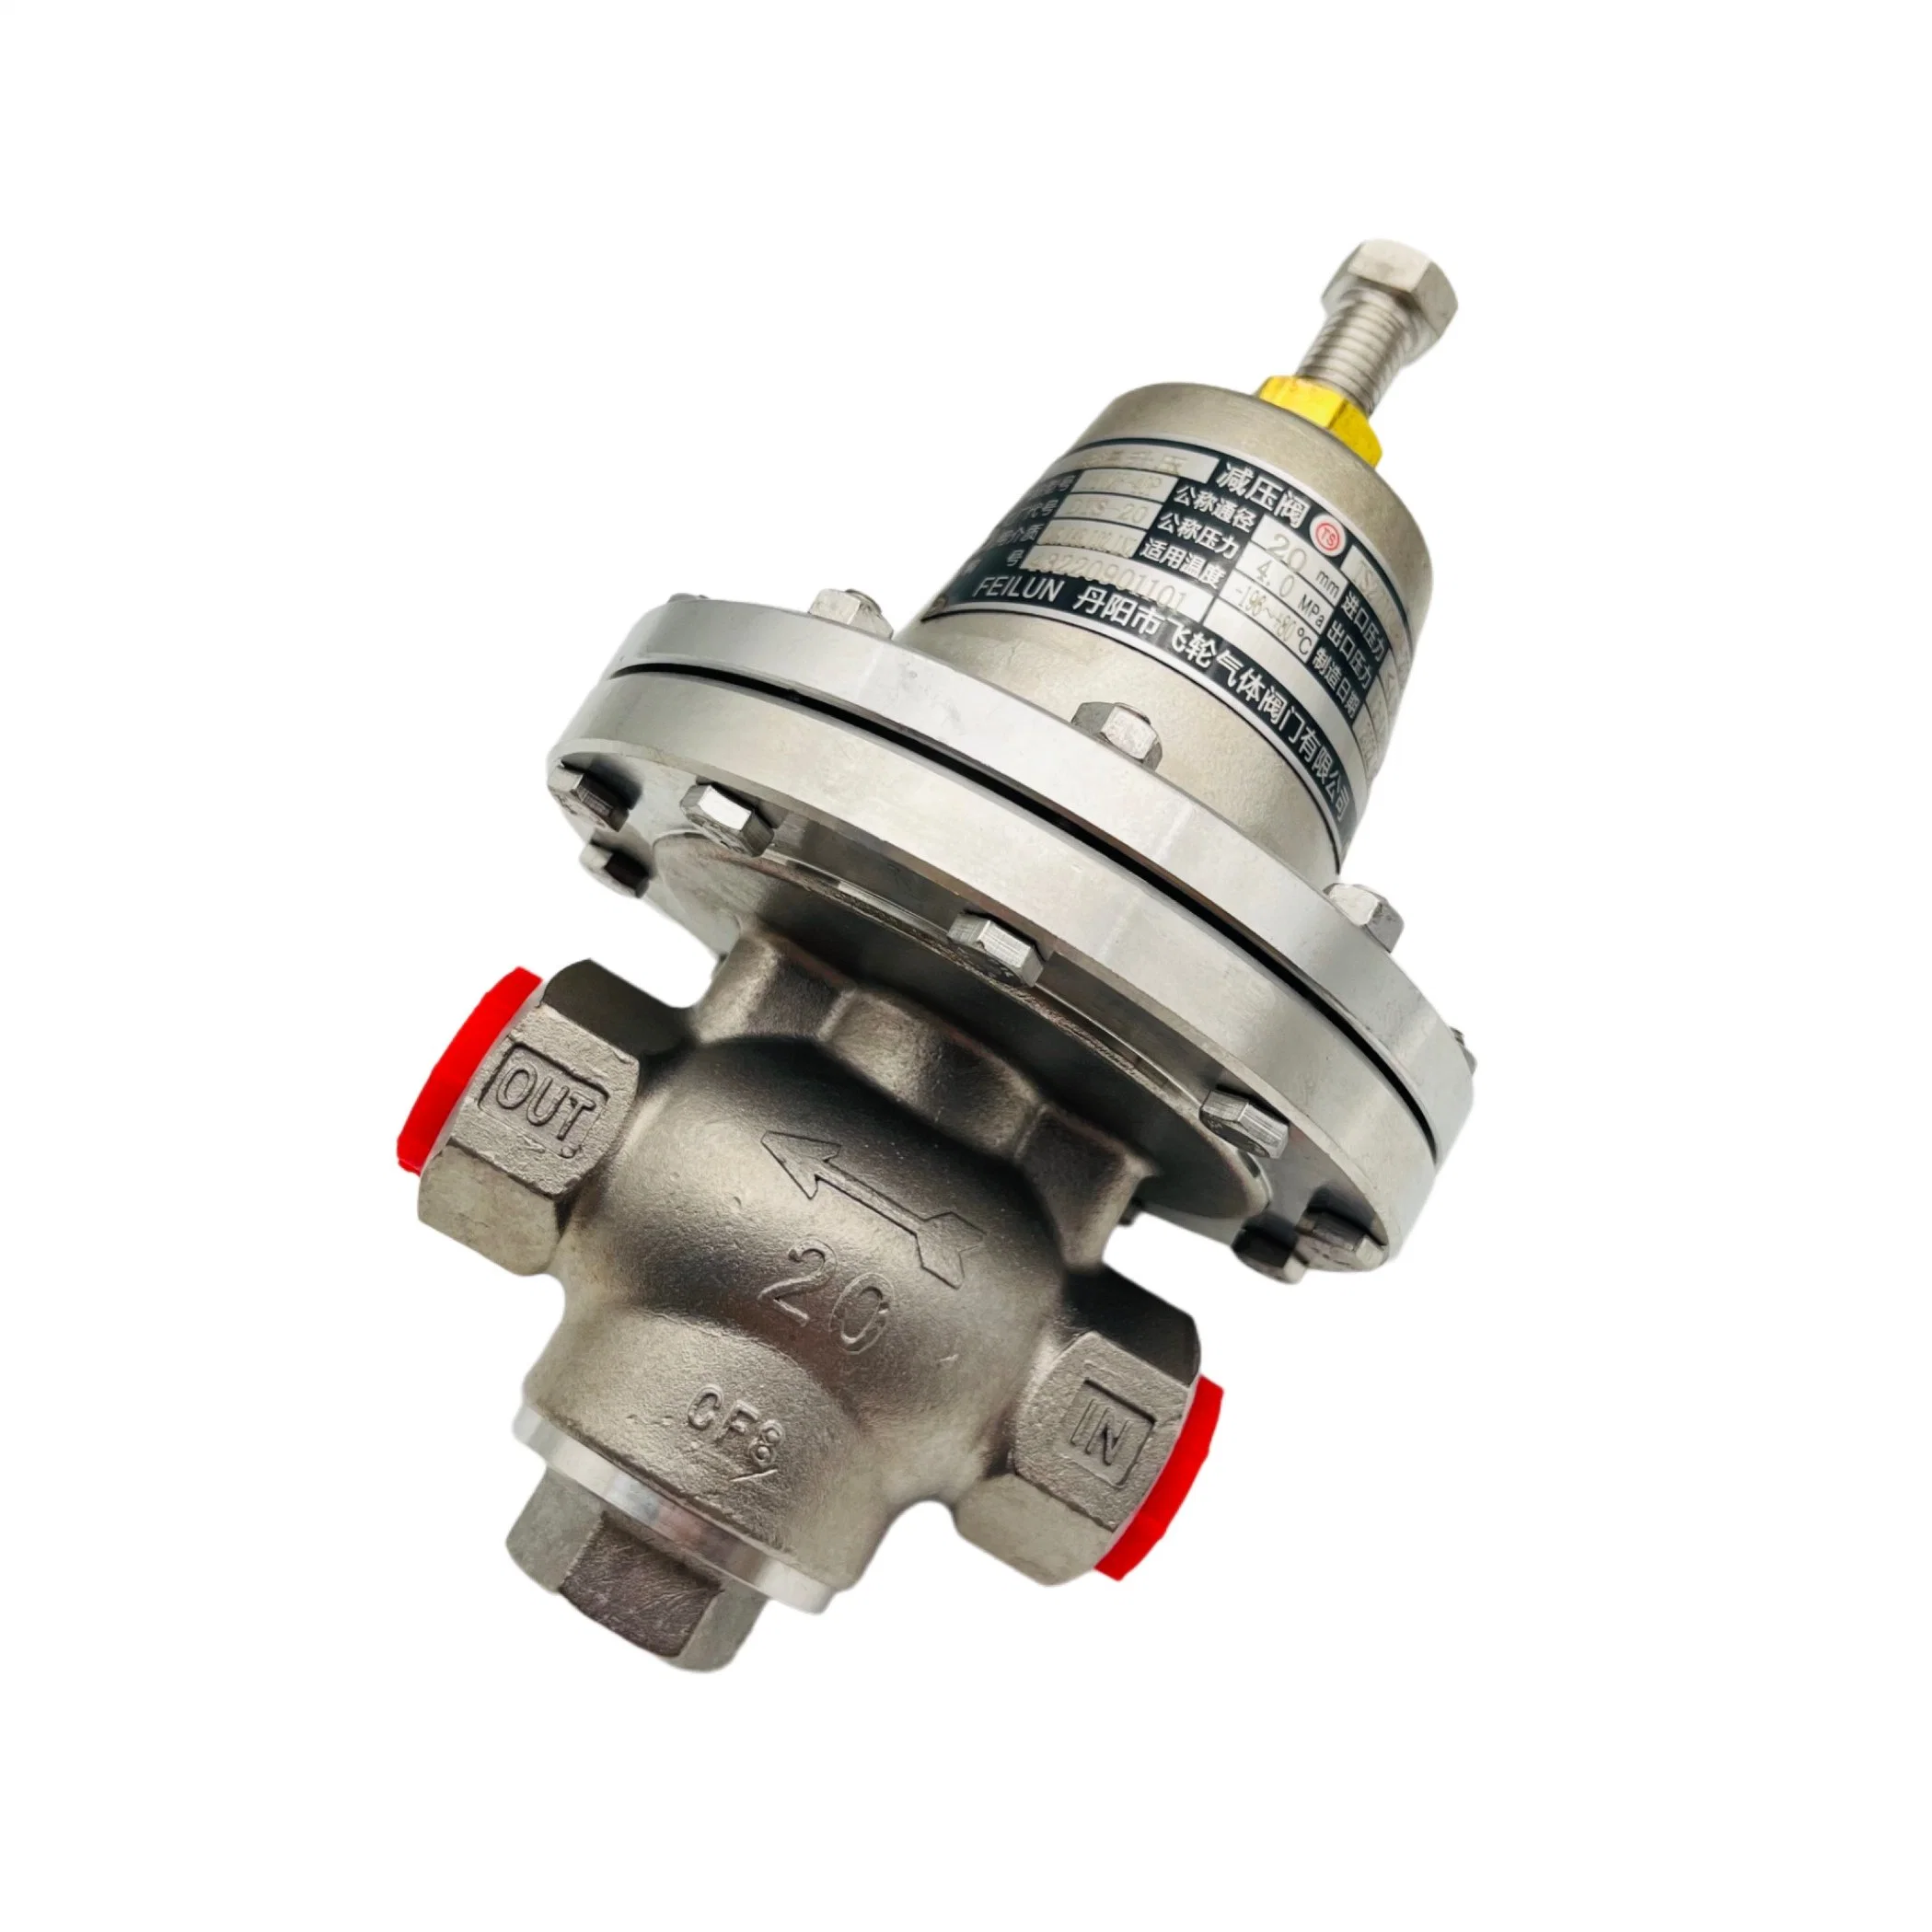 Dys-20 Stainless Steel Low Temperature Cryogenic LNG Pressure Building Regulator